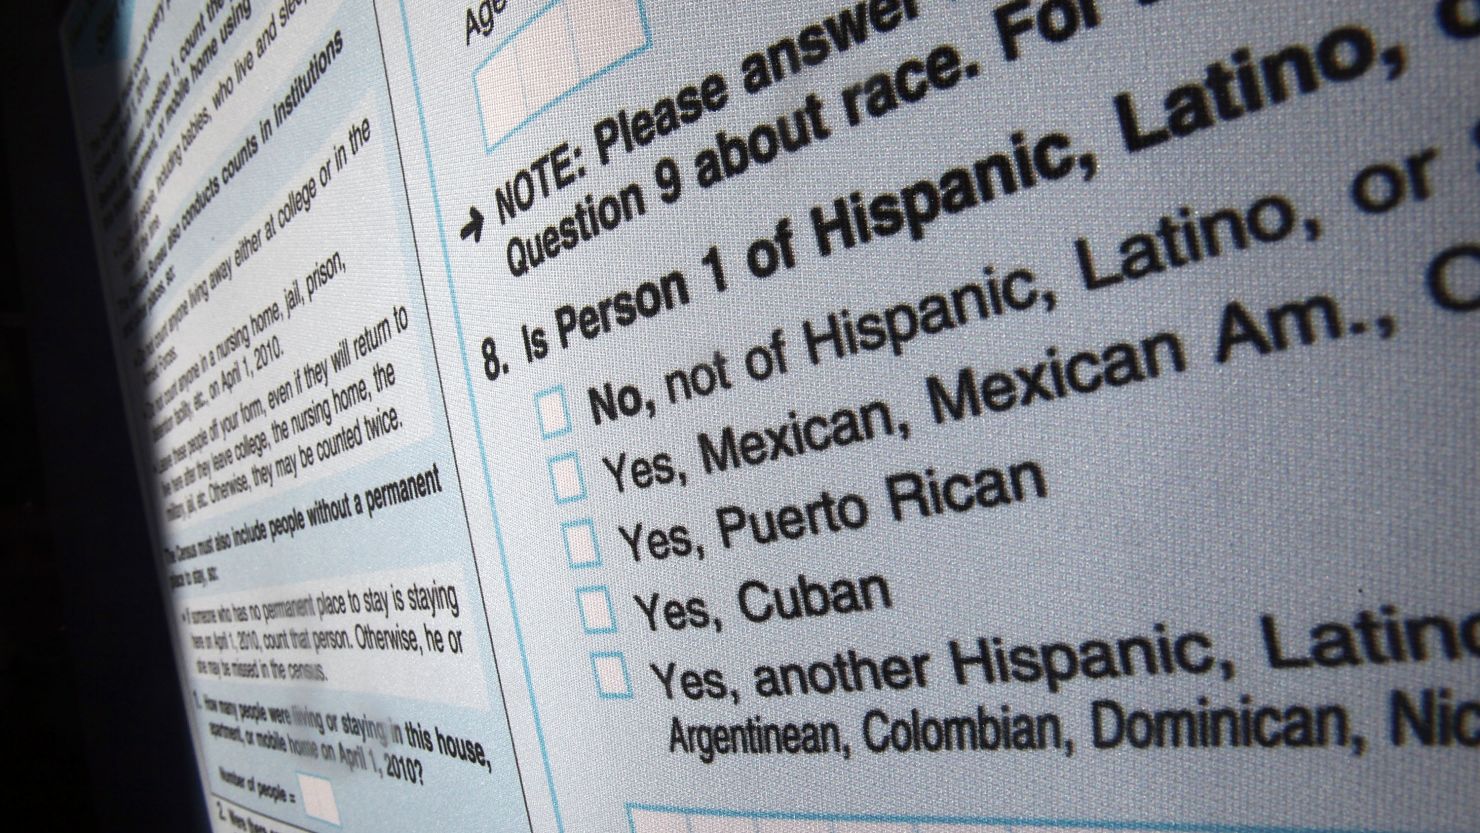 A sample US census form is seen during an event in New York City on January 4, 2010.